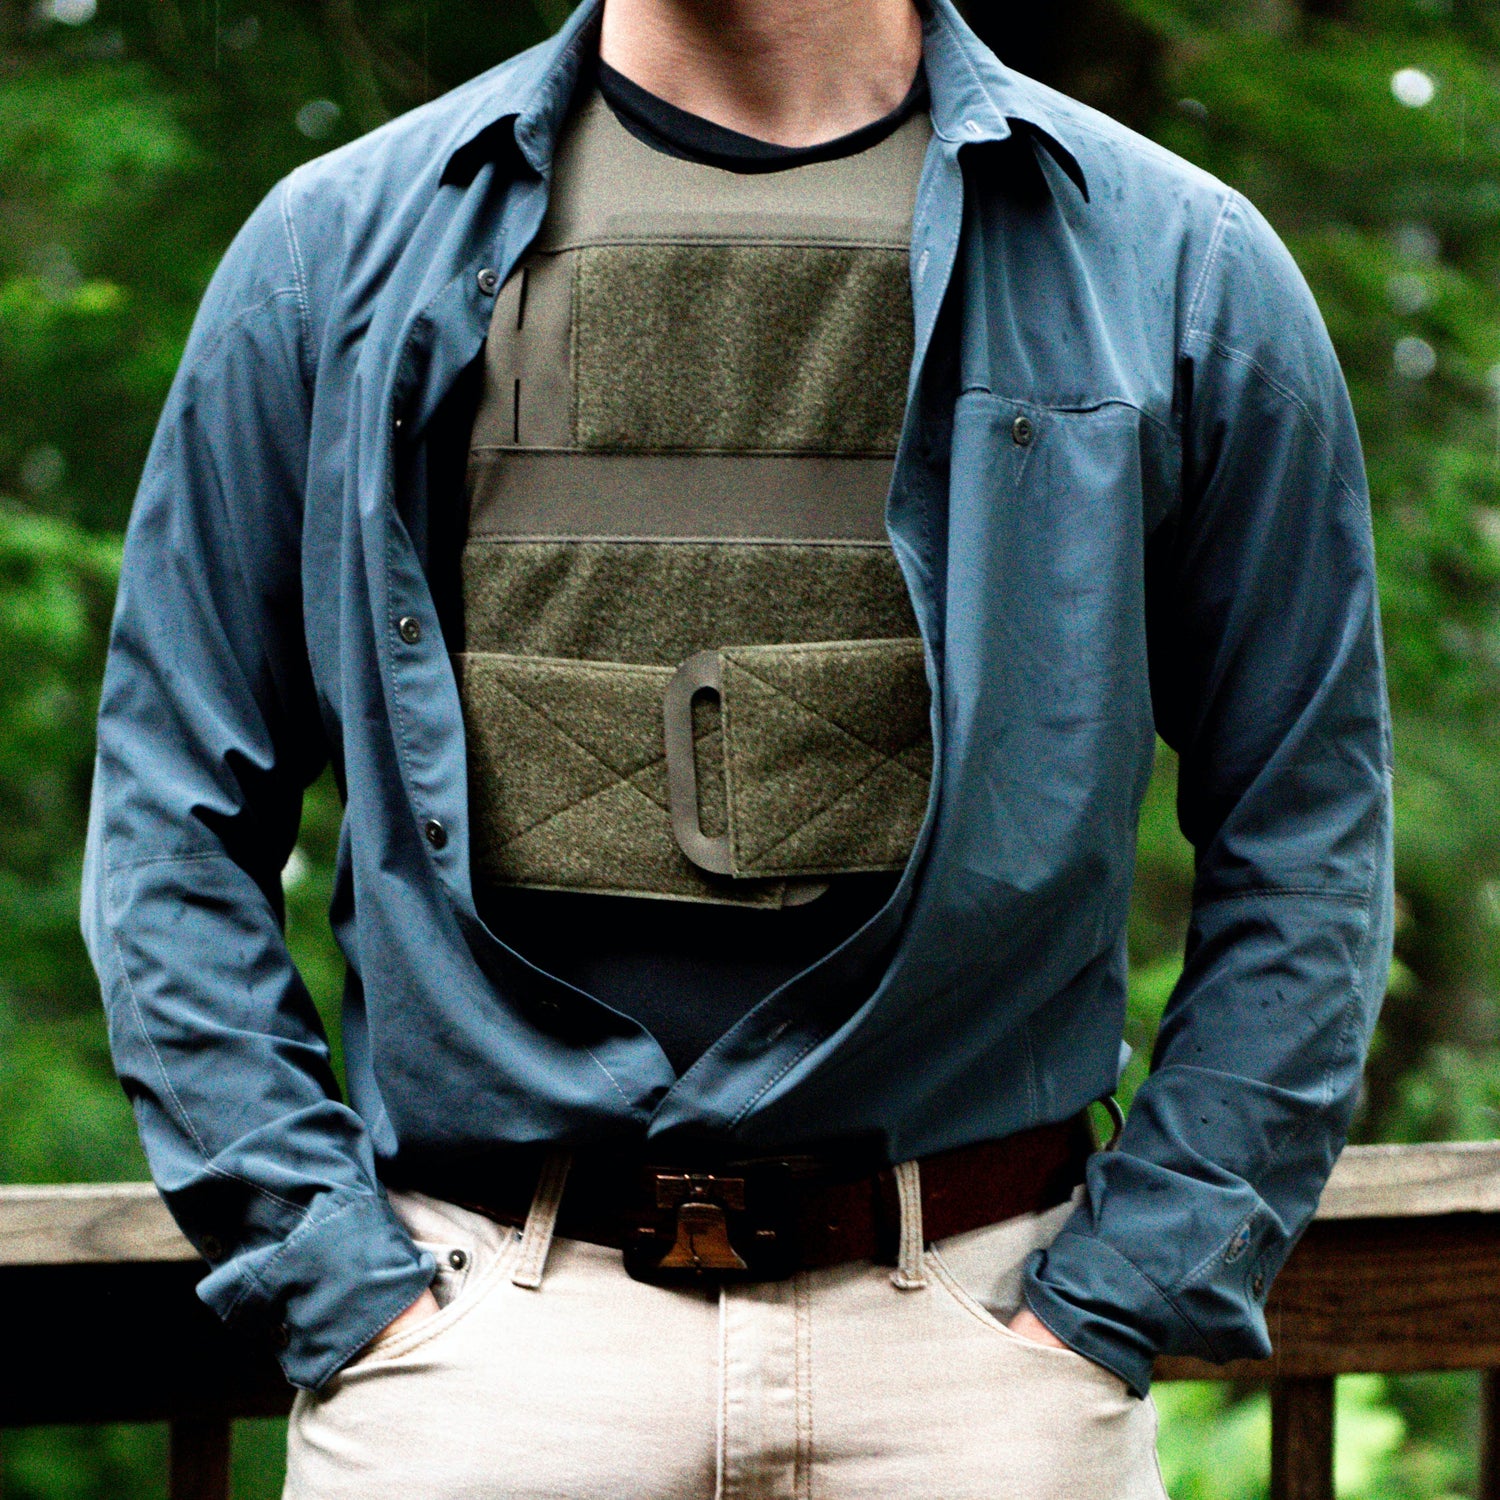 The Ultimate Guide to Understanding Plate Carriers